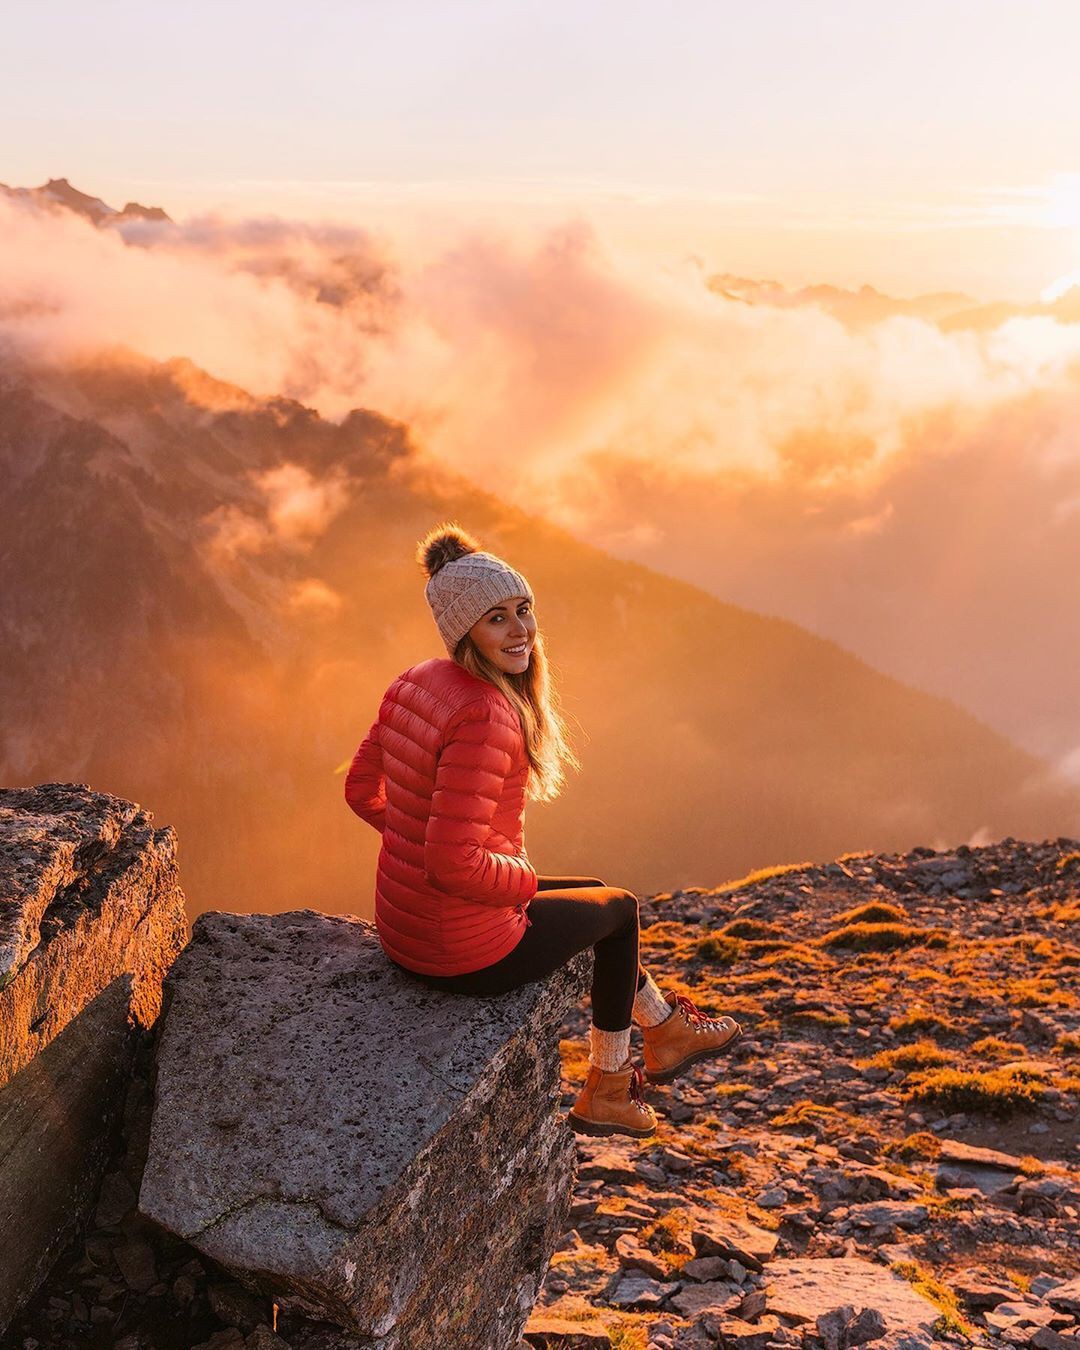 Orange classy outfit with: Stock photography,  Orange Outfits,  Hiking Outfits  